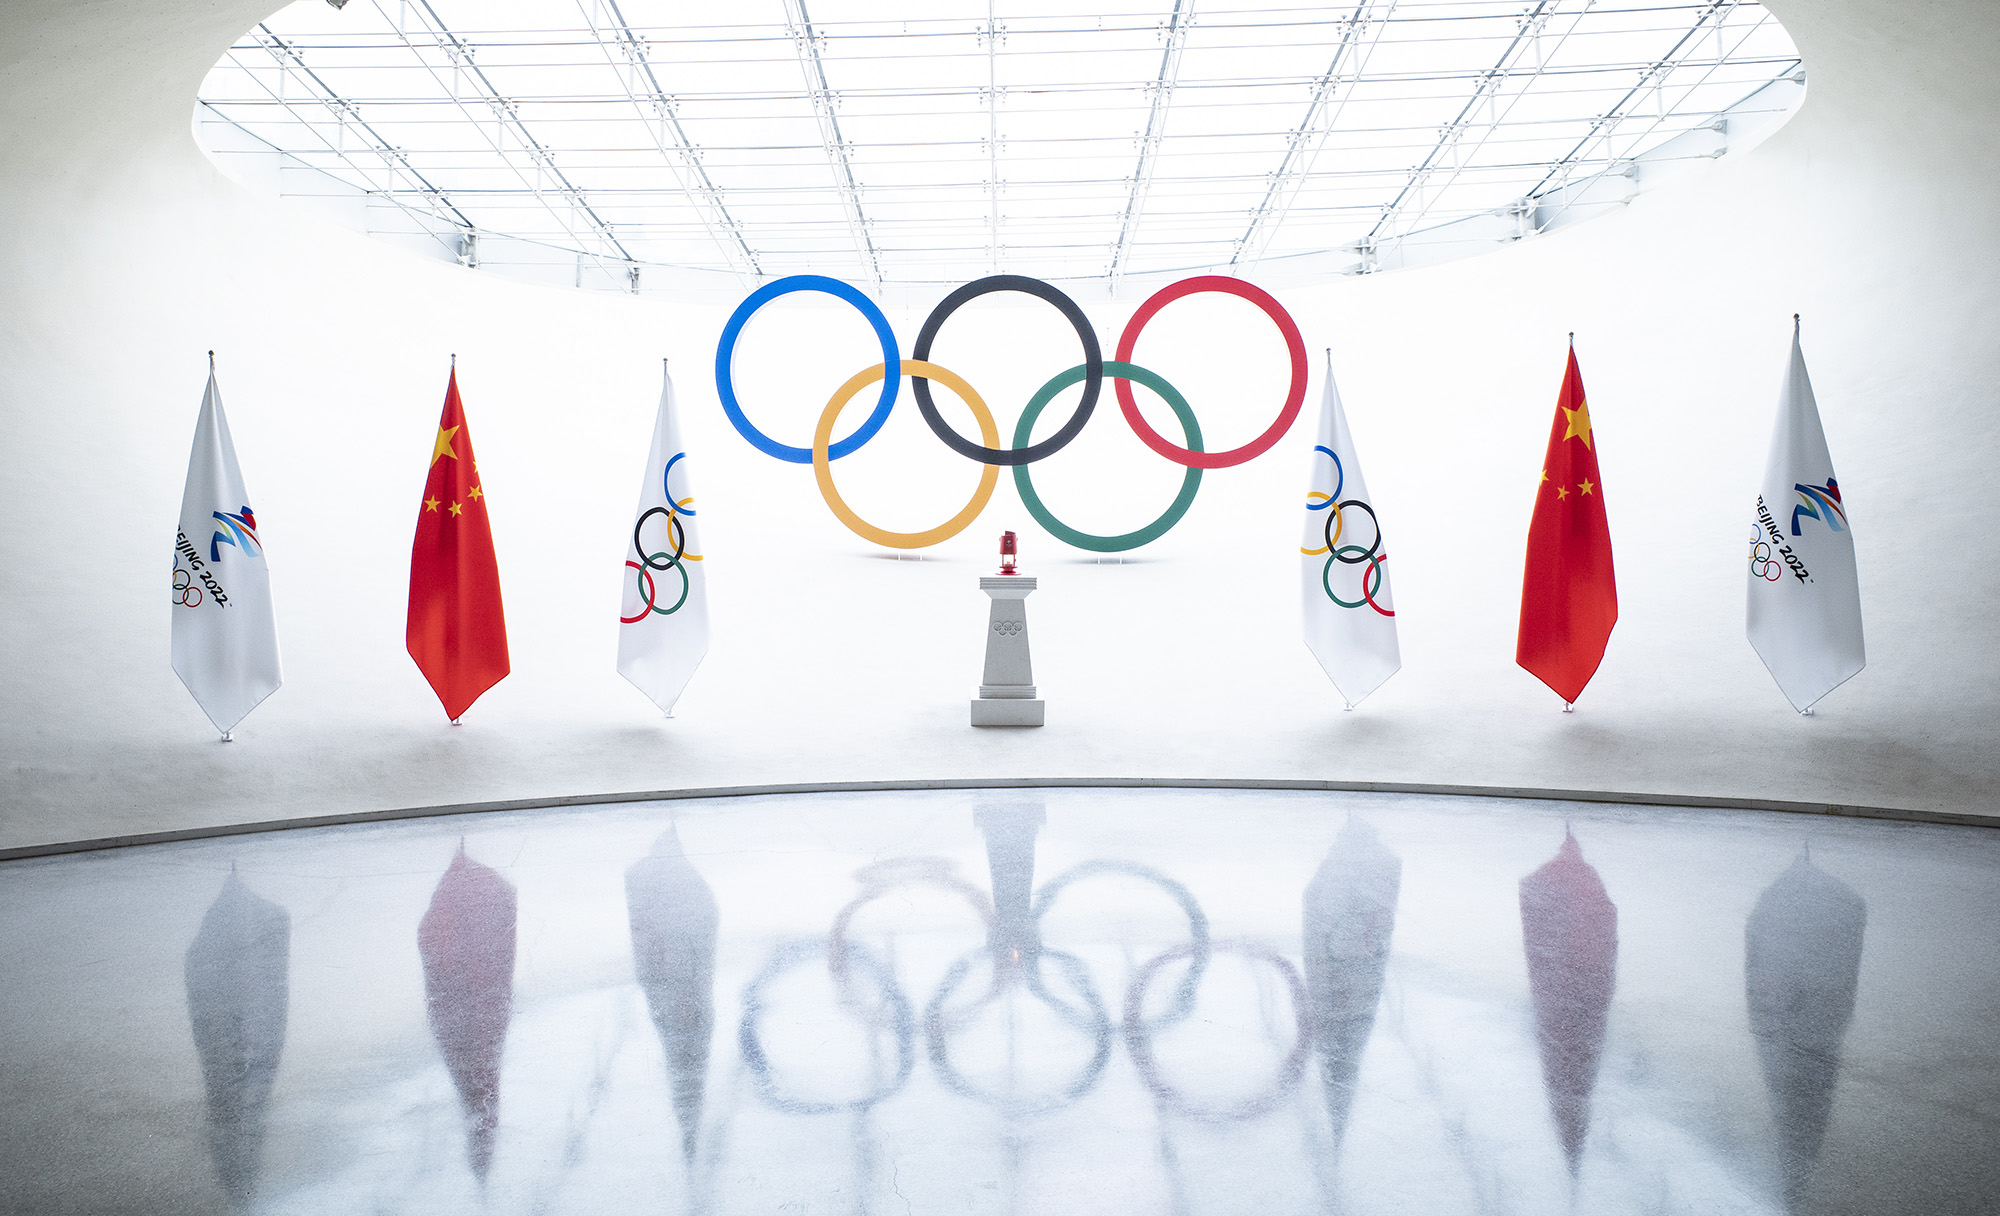 A lantern containing the Olympic flame for Beijing 2022 Winter Games is on display at Beijing Olympic Tower on November 5, 2021 in Beijing.